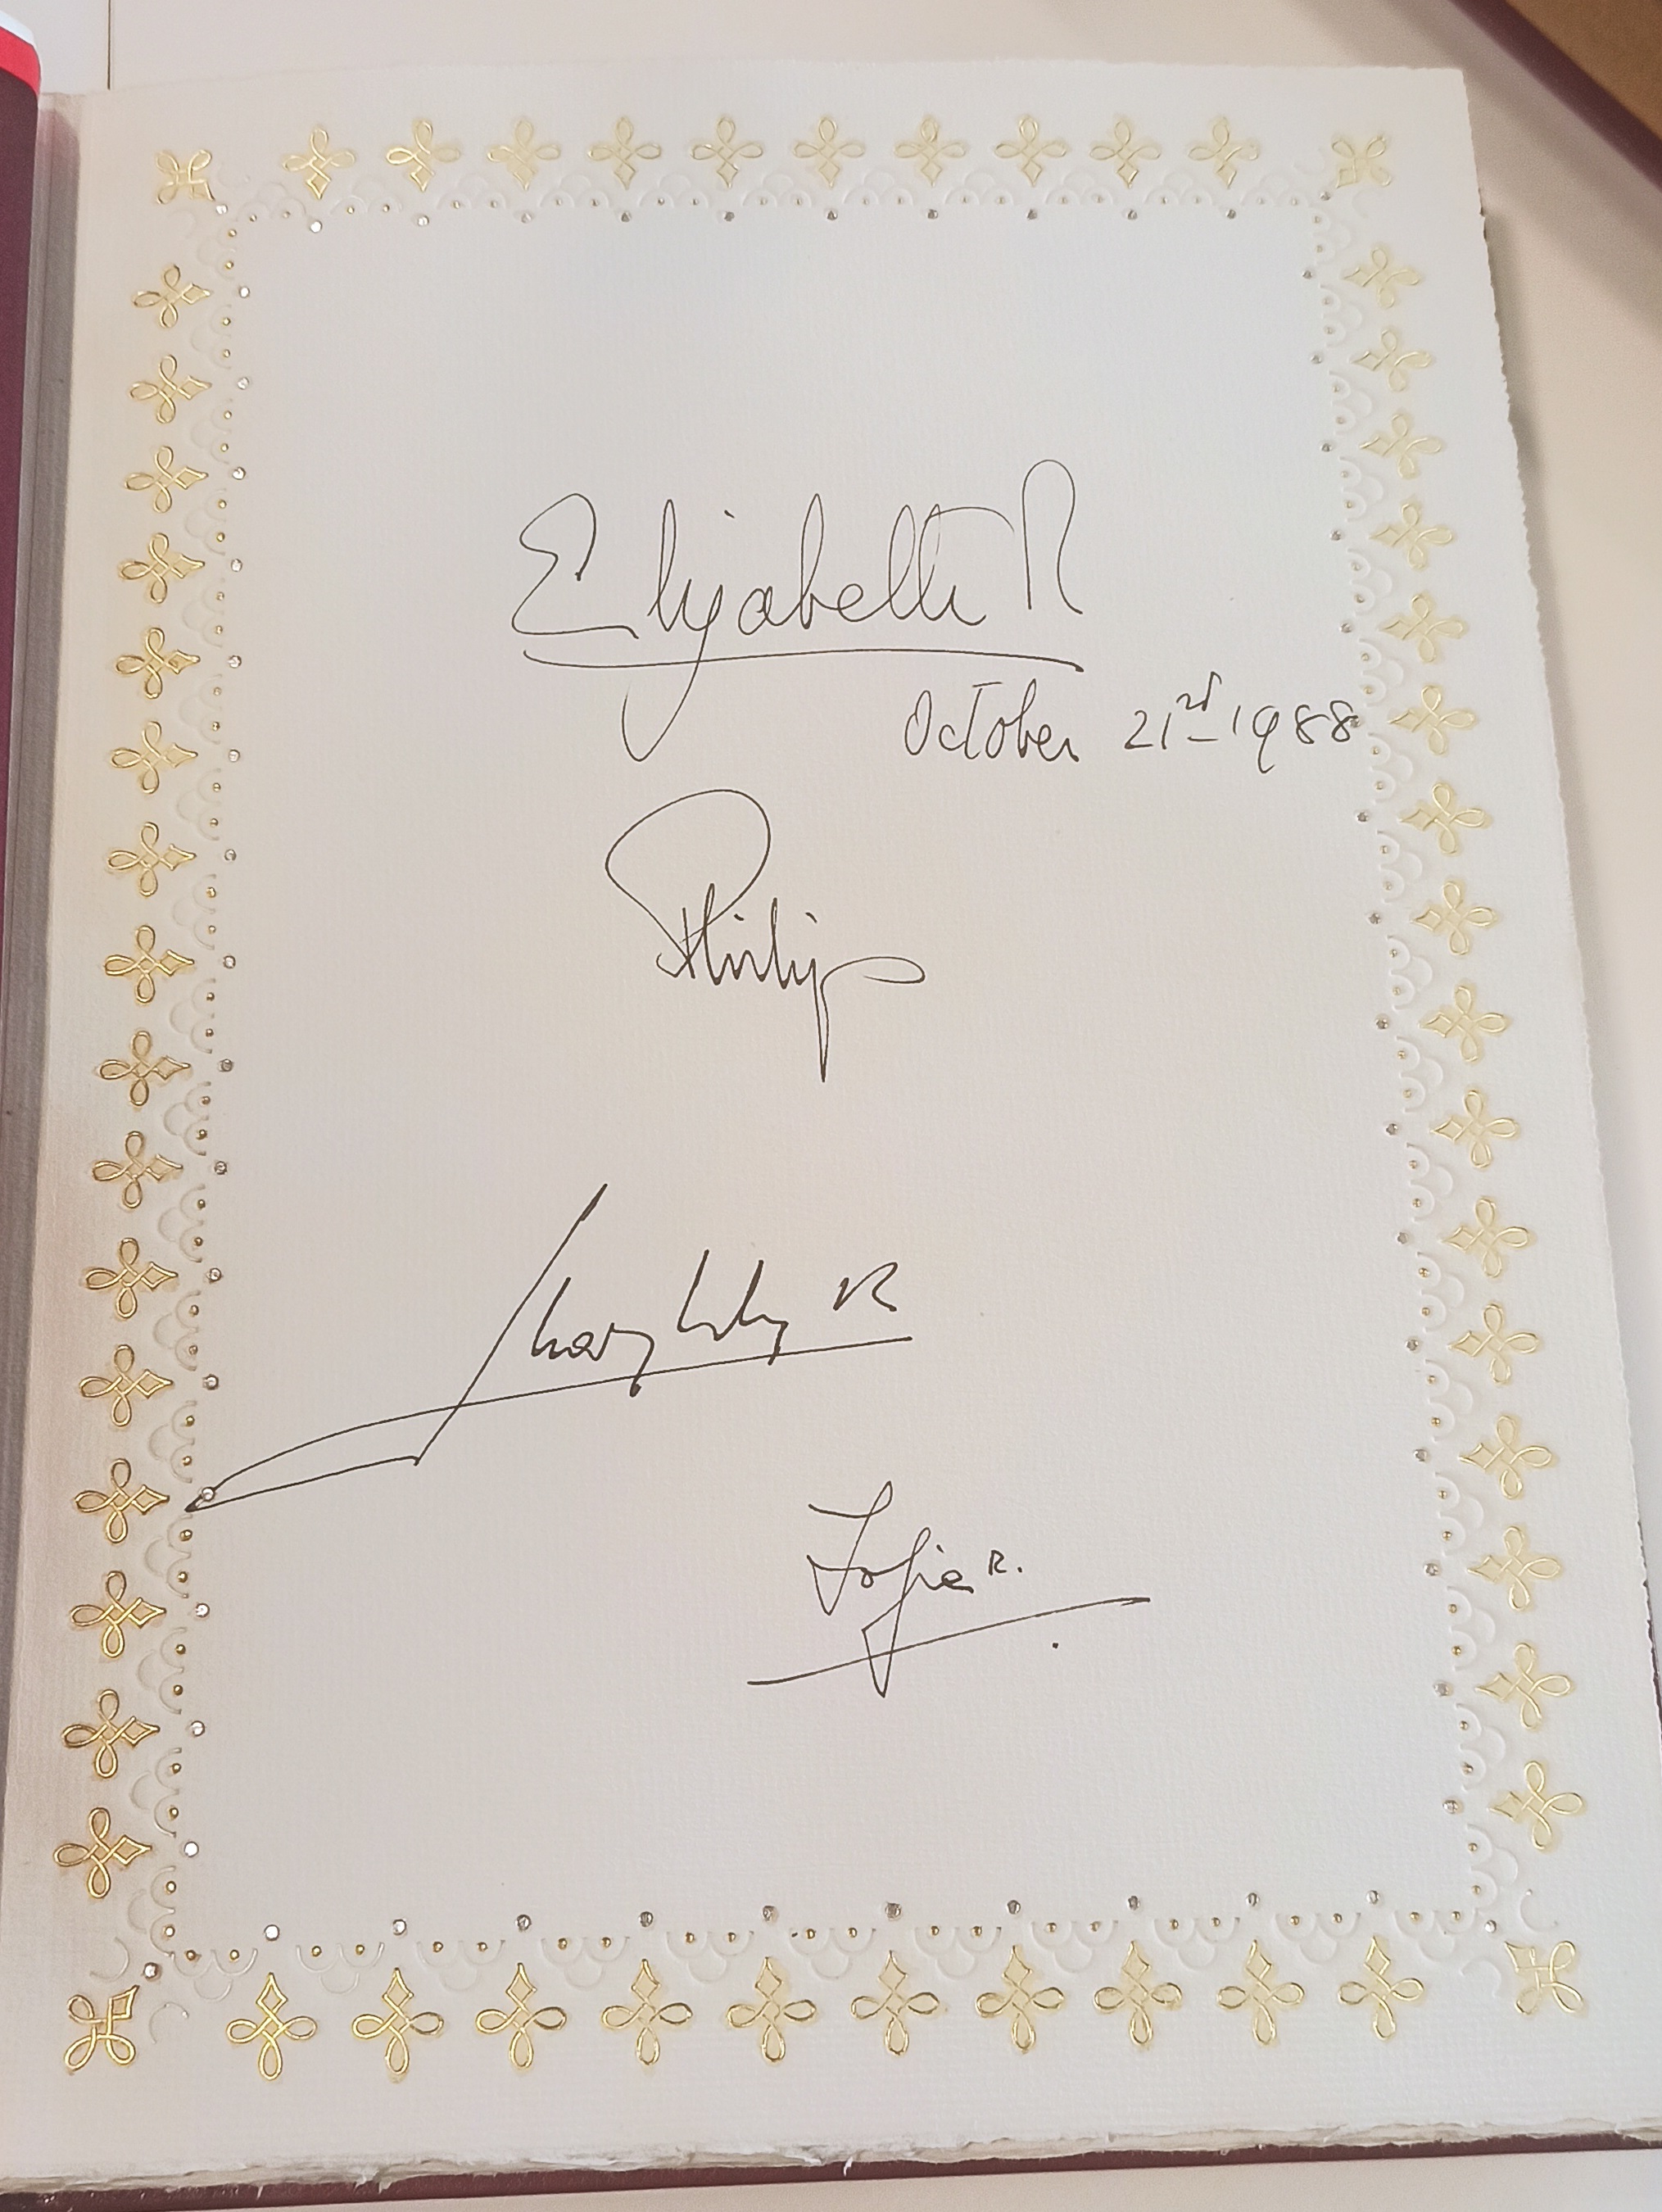 Queen Elizabeth II signed Barcelona's Museu Picasso book of visits on October 21, 1988